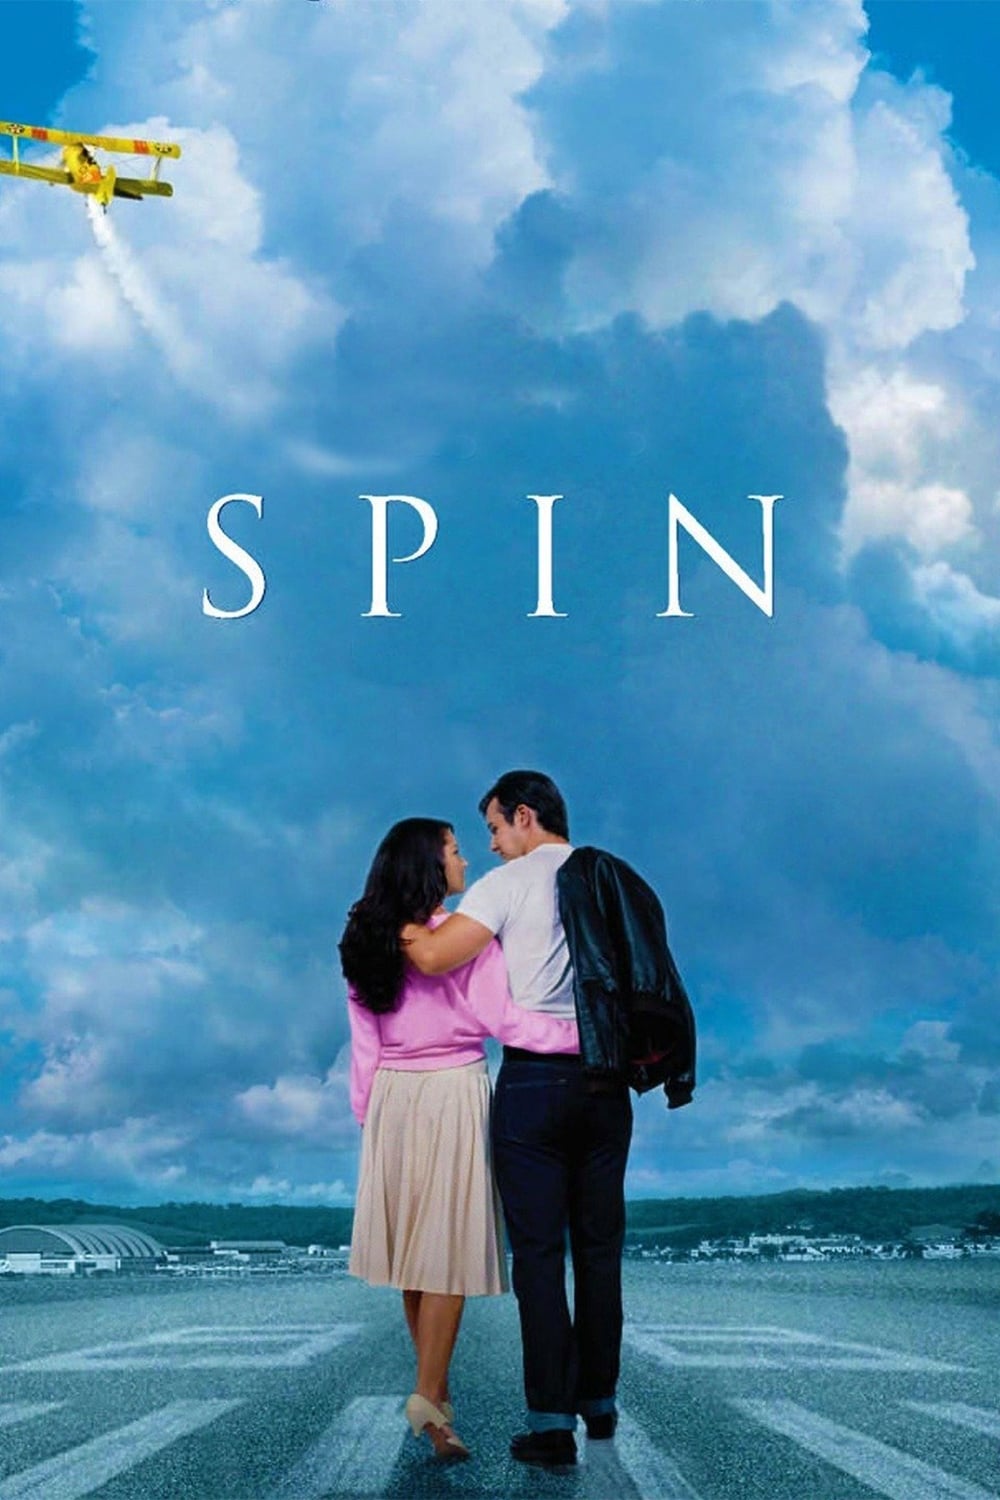 Spin streaming